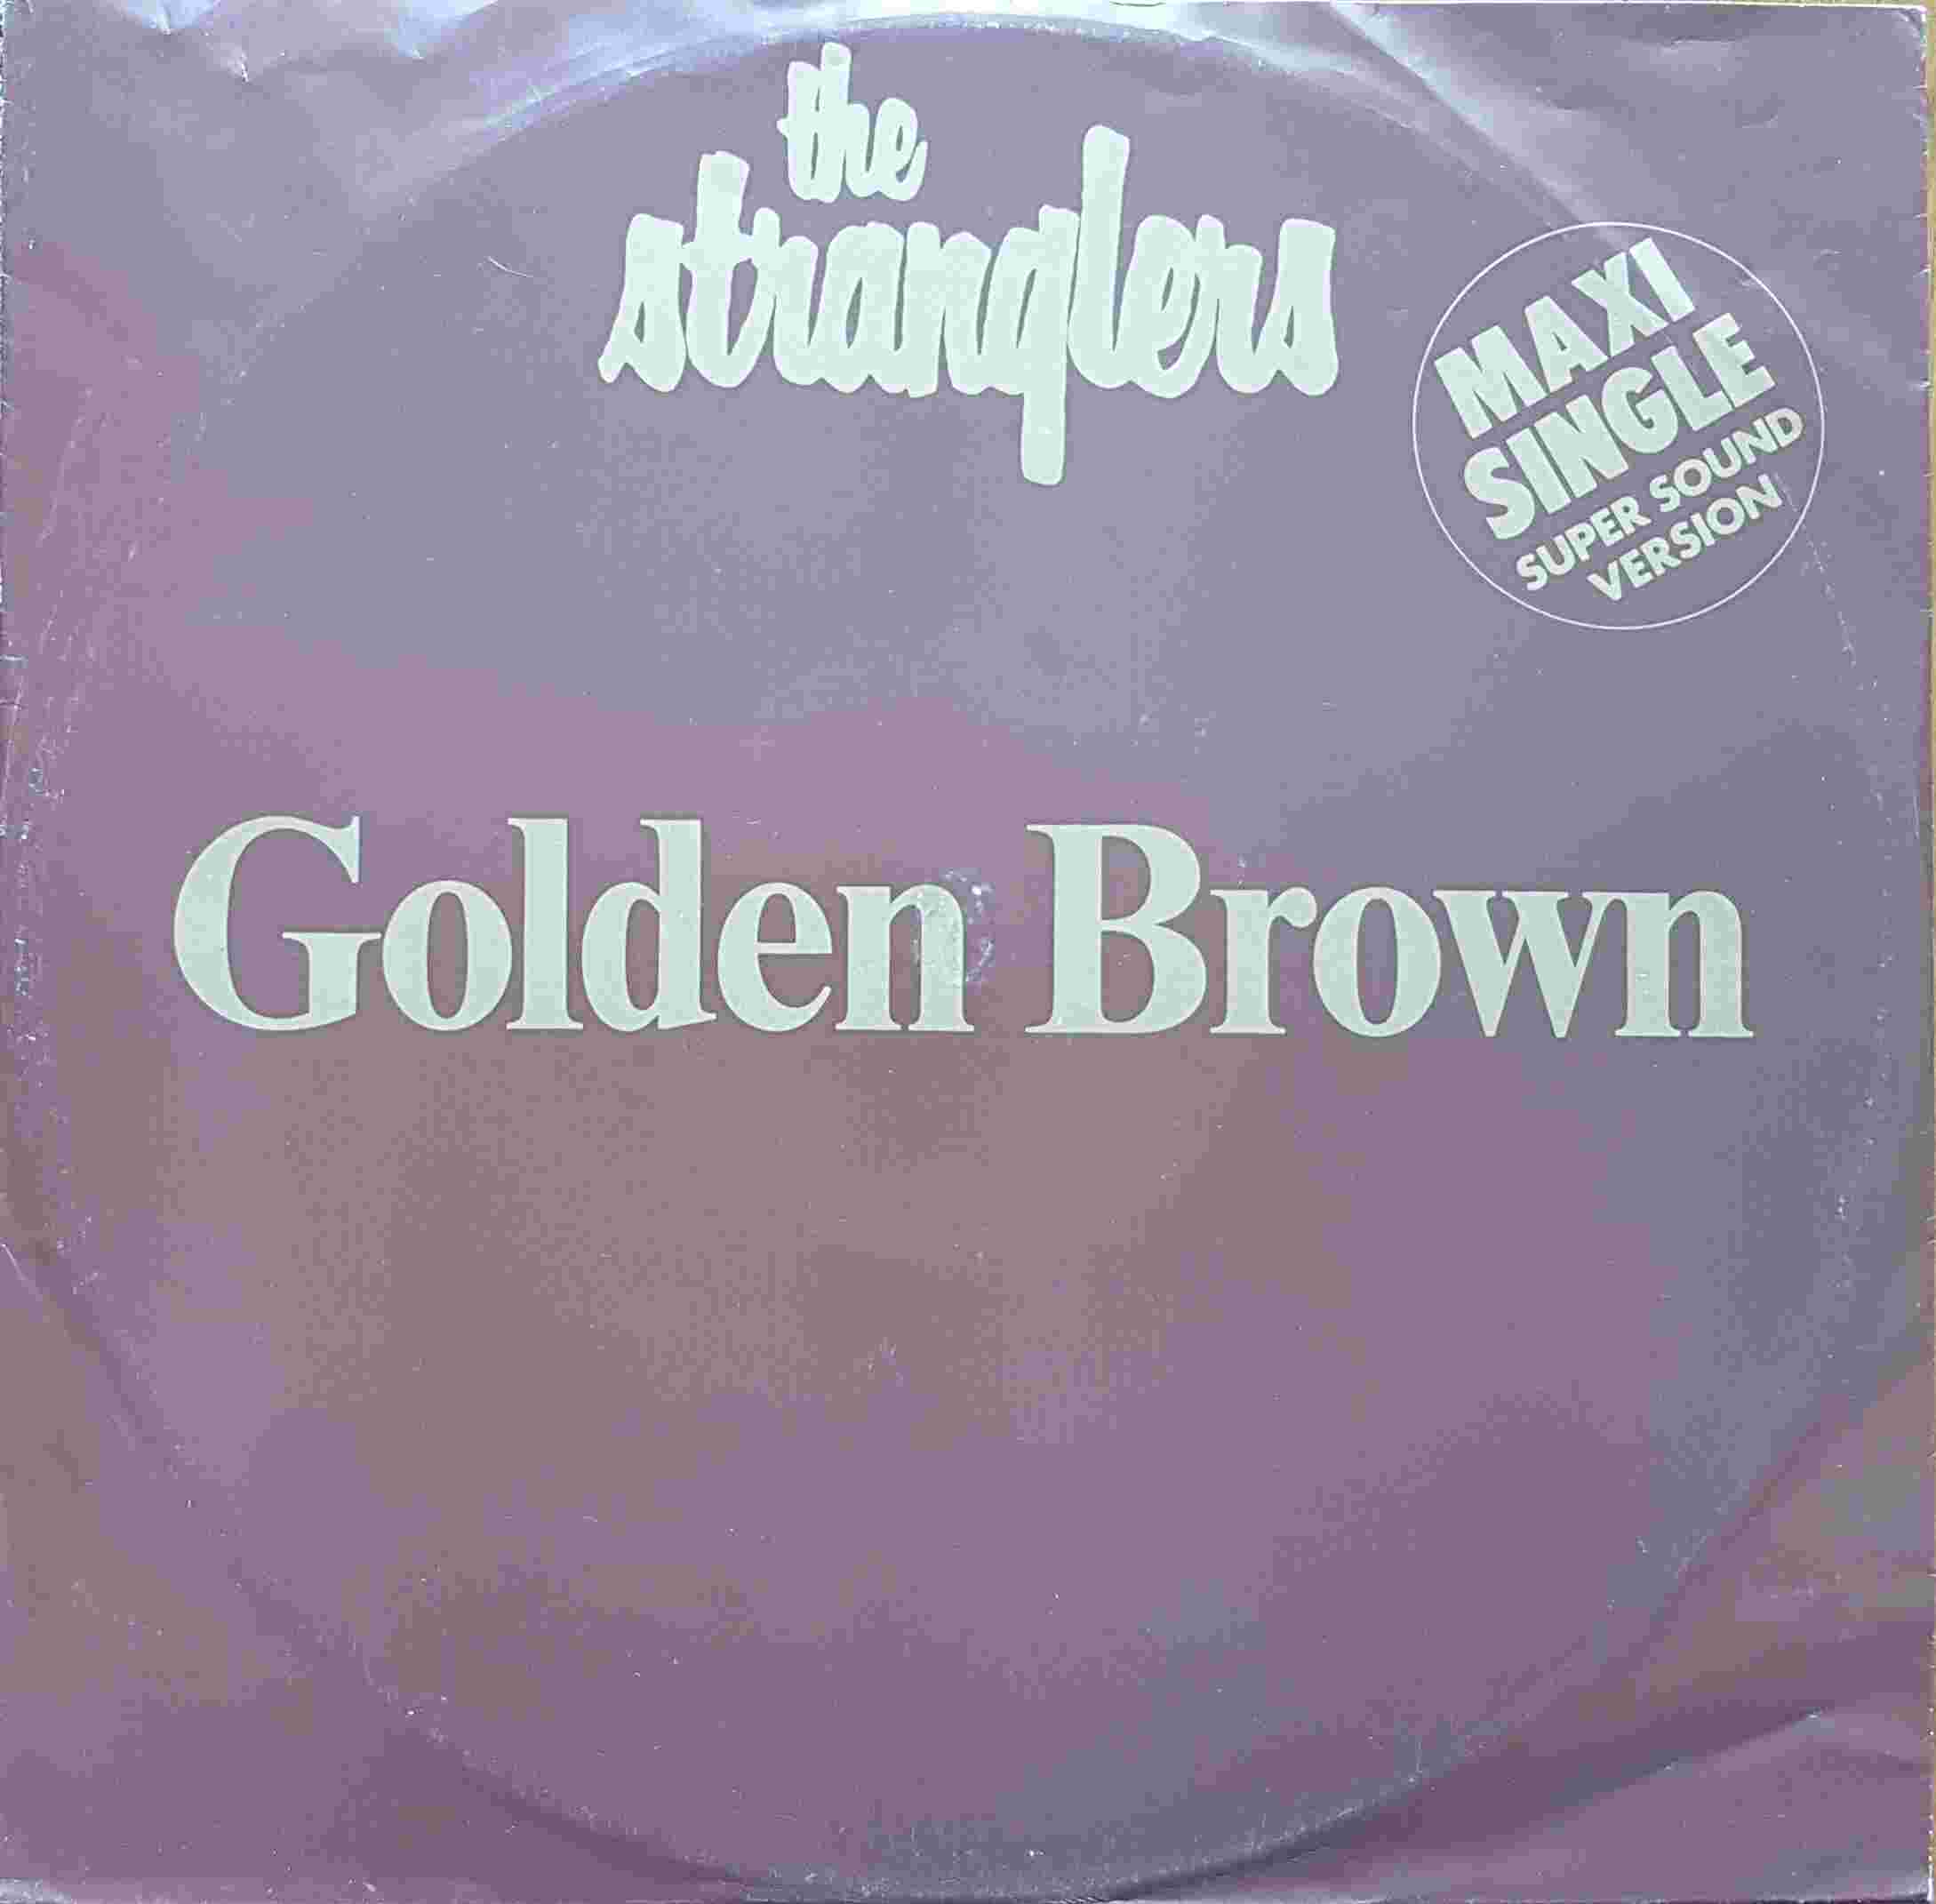 Picture of 052 - 83255 Golden brown by artist The Stranglers from The Stranglers